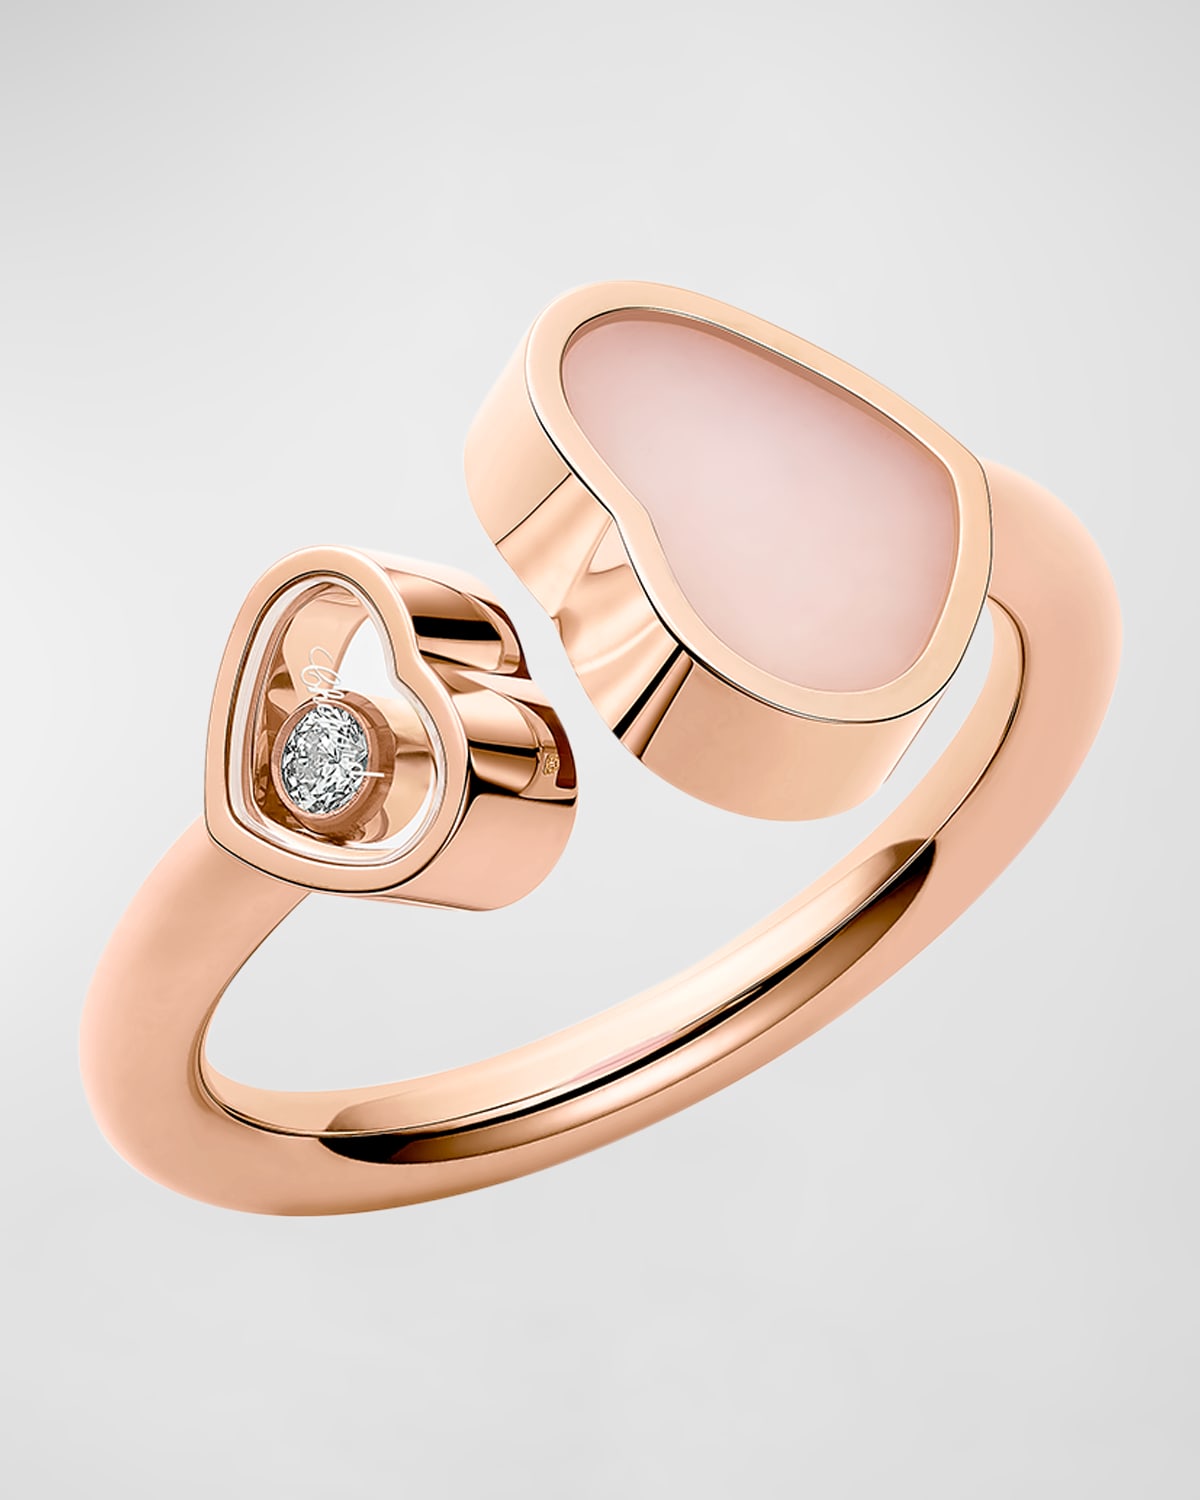 Chopard 18K Rose Gold Happy Heart Pink Opal and Diamond Ring, Size 52